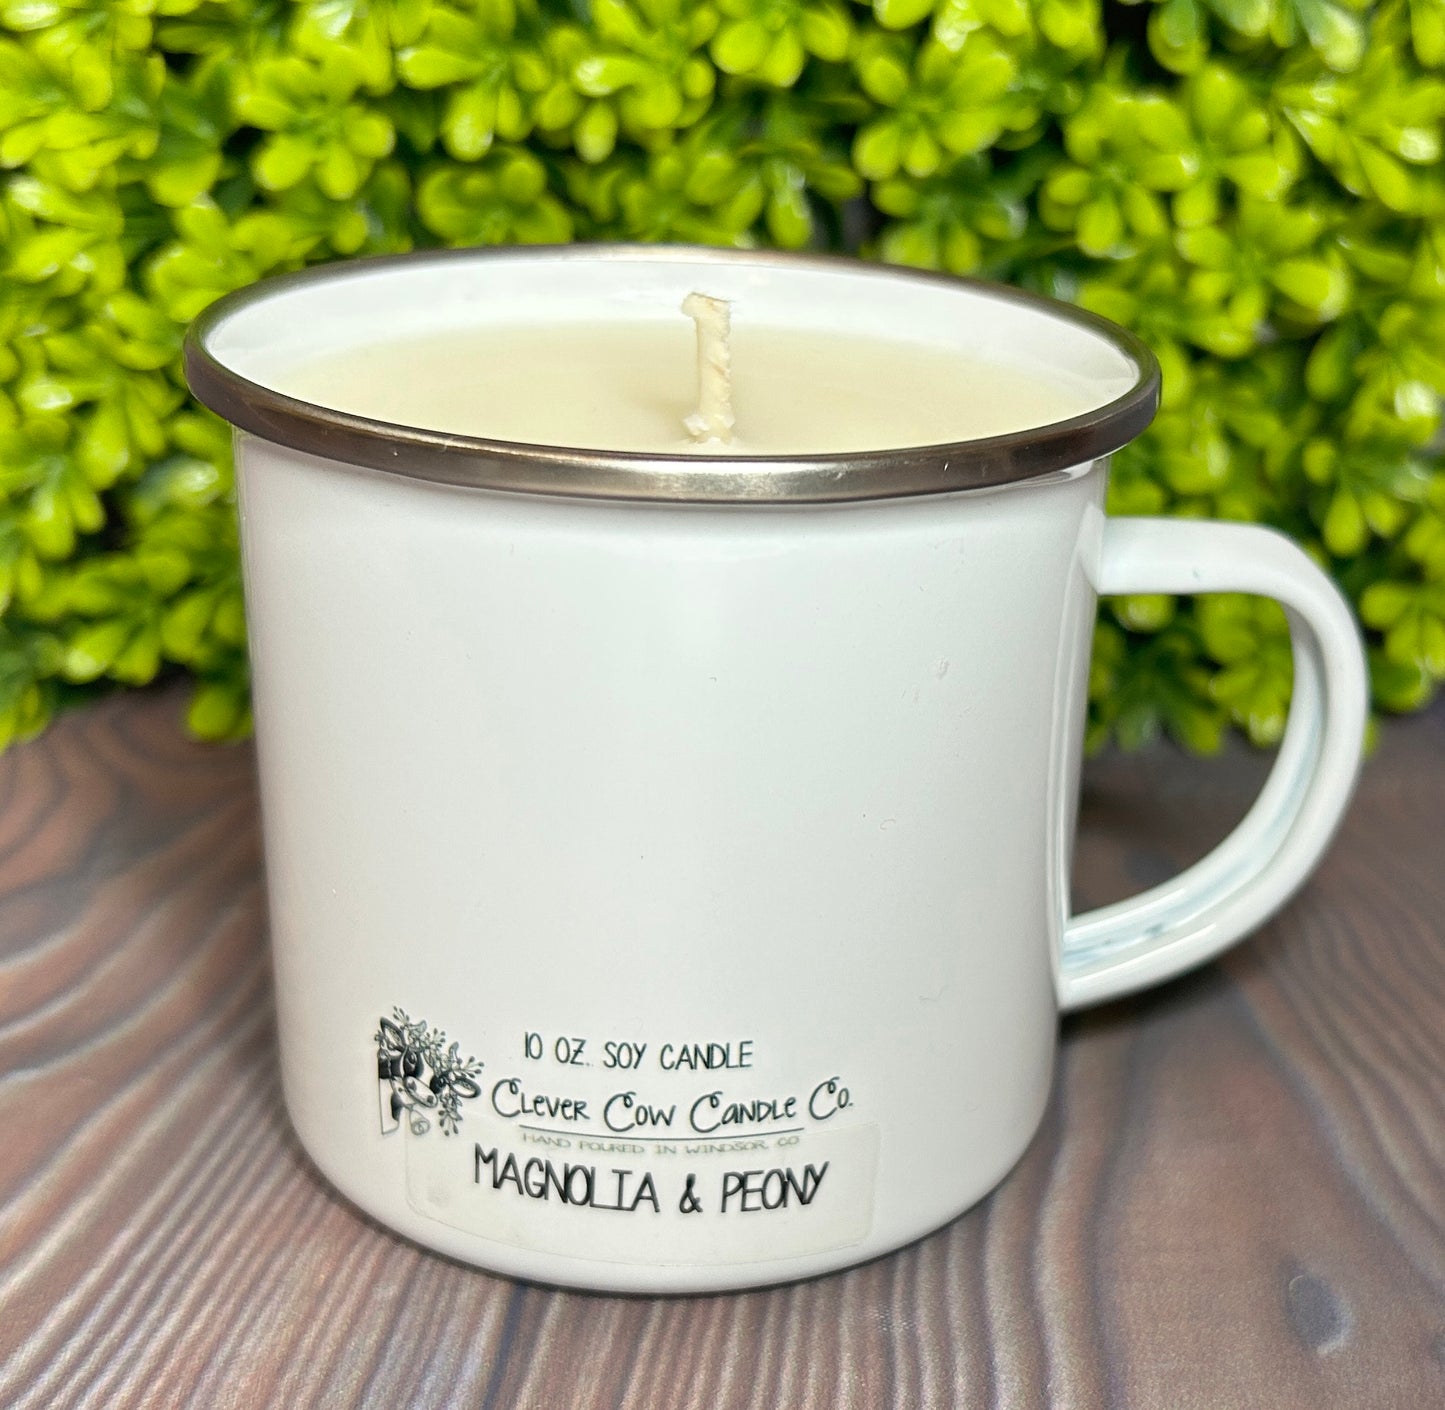 Enamel Mug Candle -  Clever Cow Candle Co Signature Cow